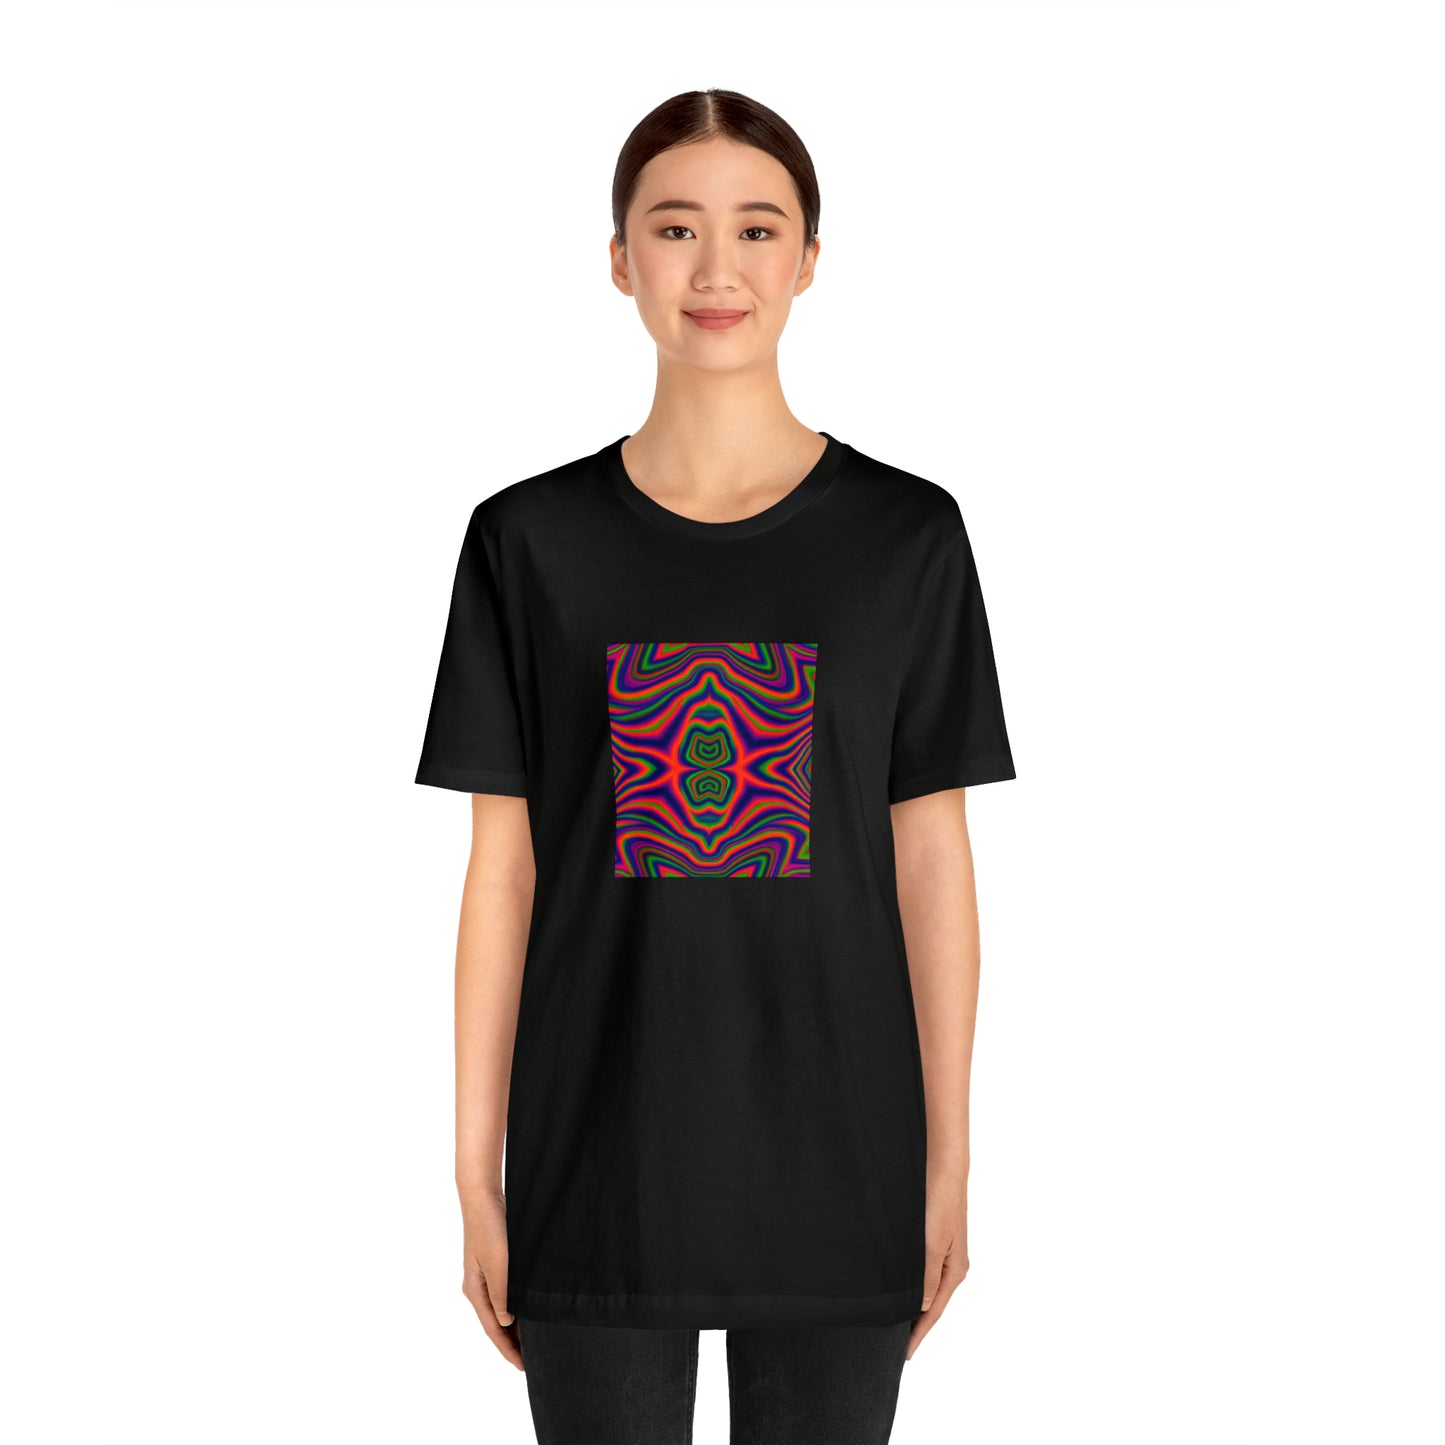 Nora Fourteen - - Psychedelic Trippy Pattern Tee Shirt